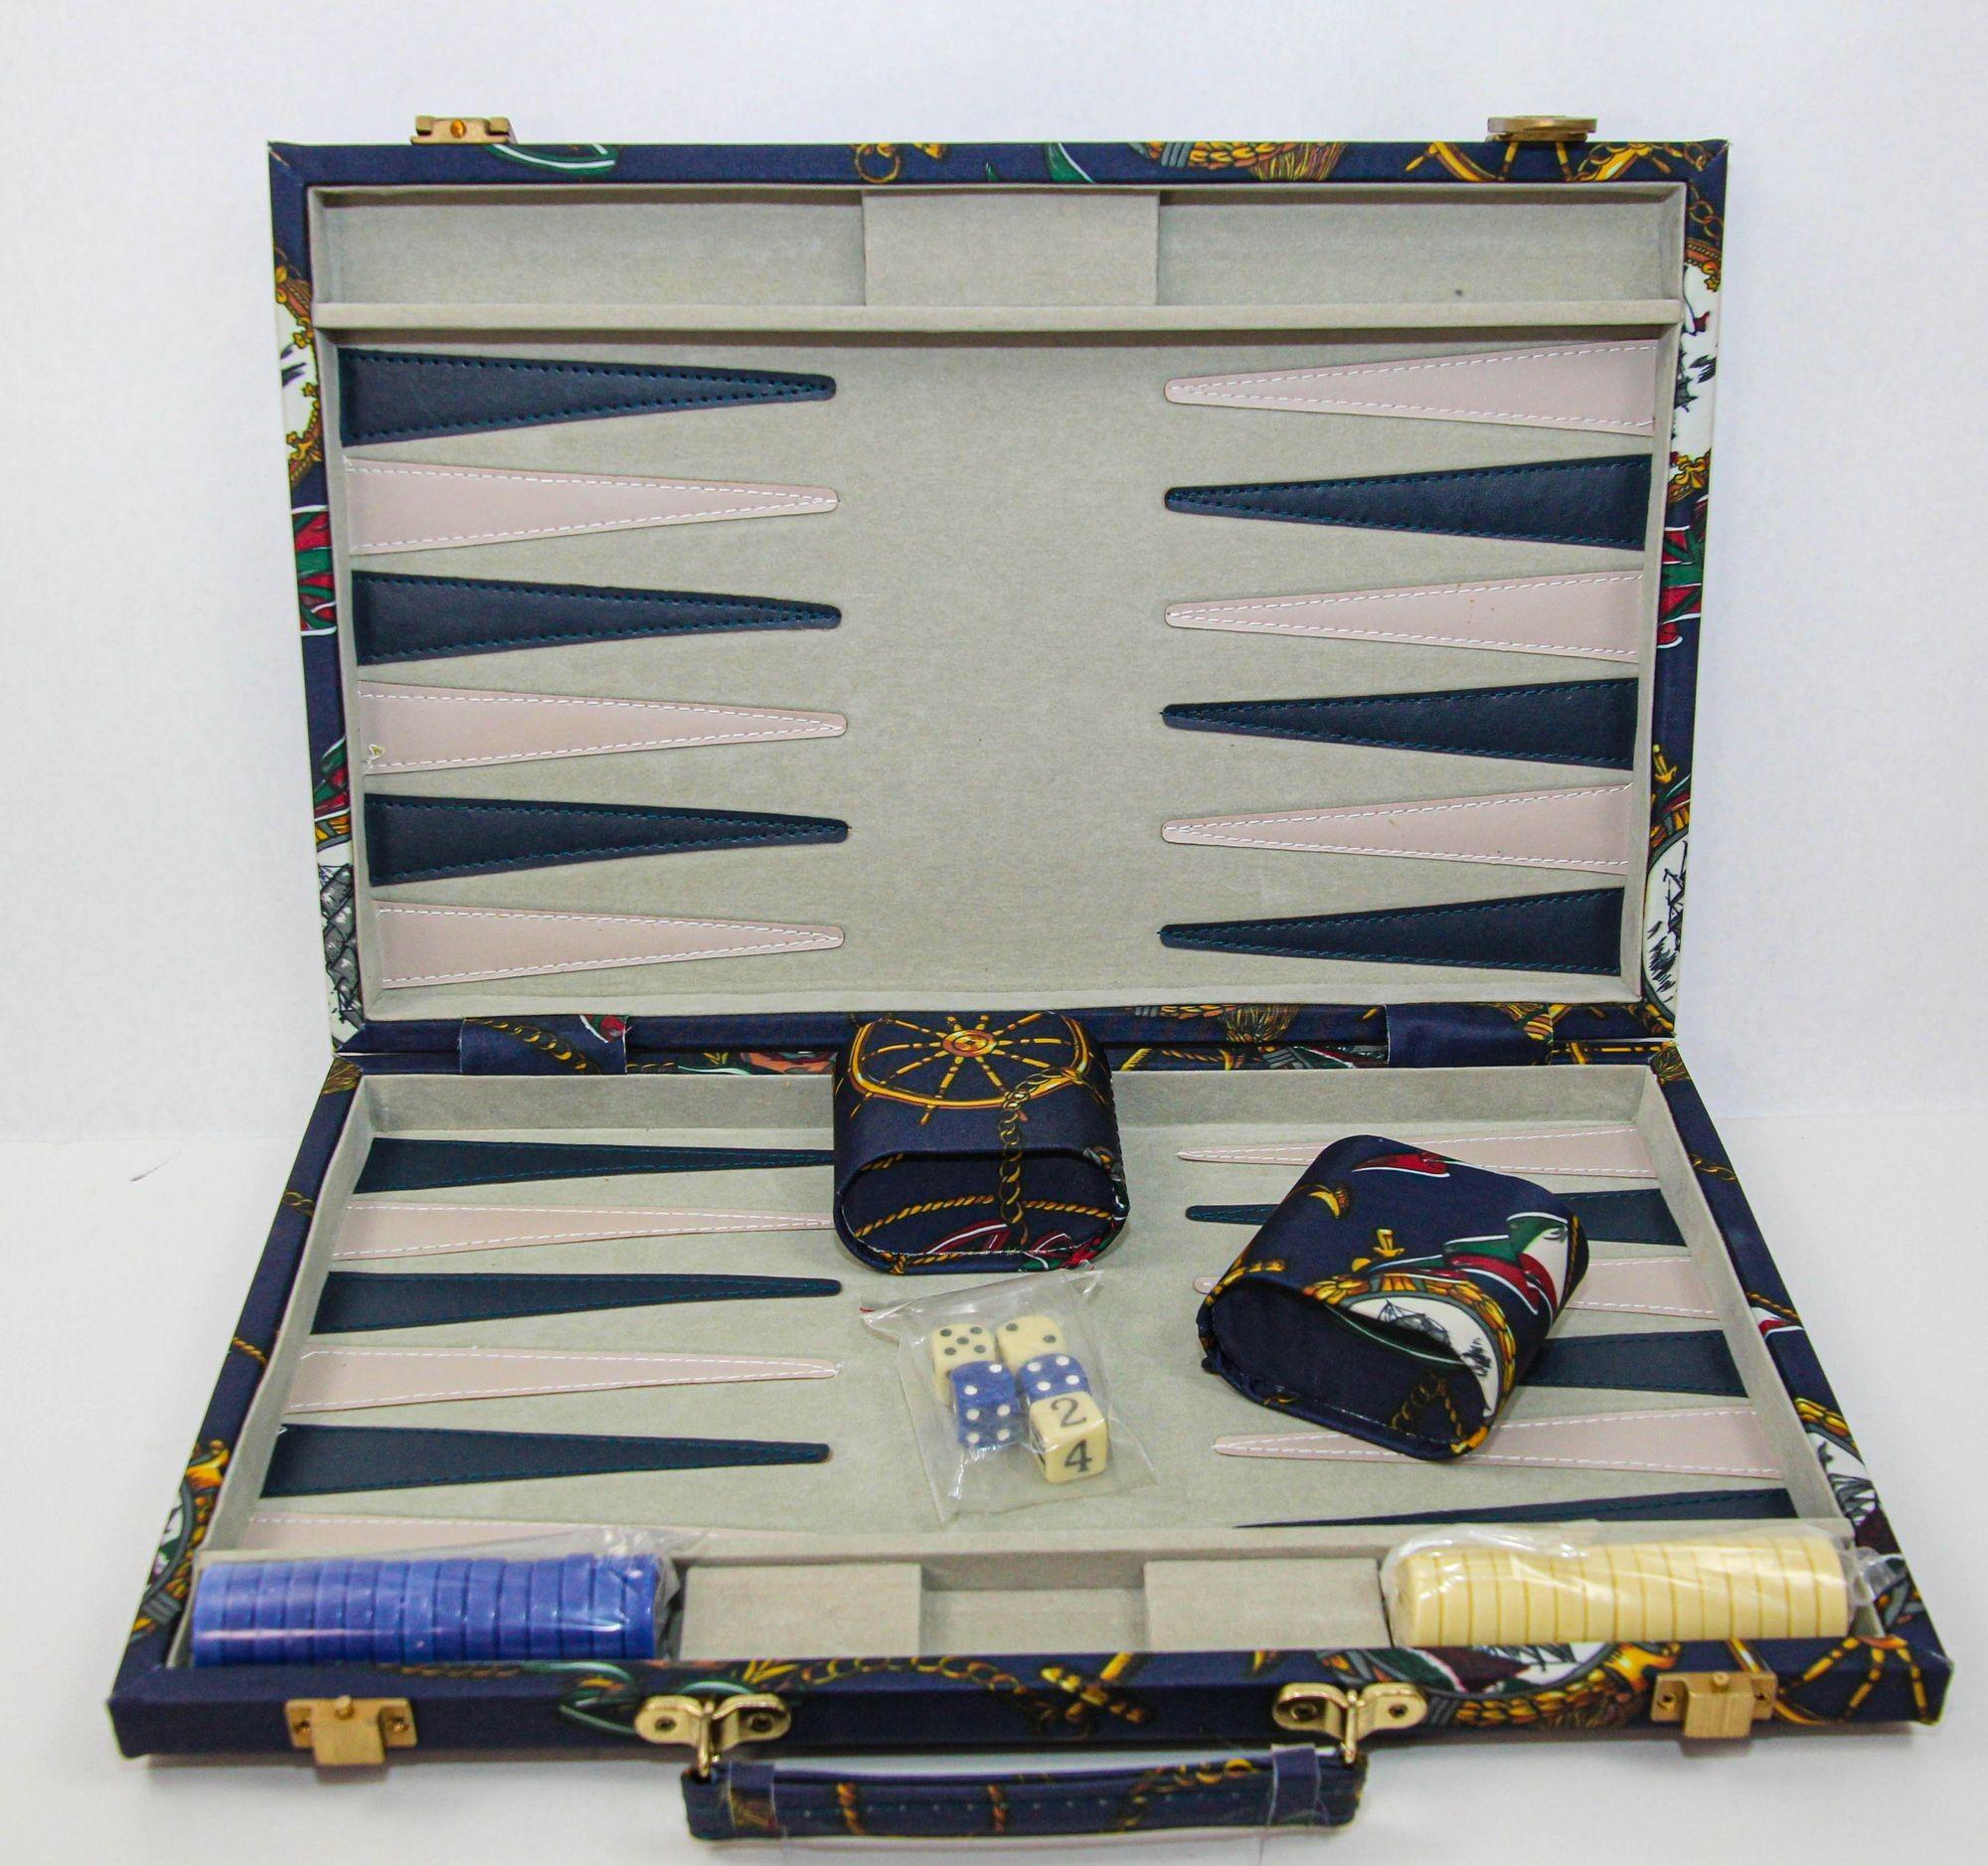 Envision an opulent large backgammon set case, drawing inspiration from the distinguished design aesthetics of both Hermes and Gucci, with a refined focus on a sophisticated nautical theme. The exterior of this exquisite case is meticulously